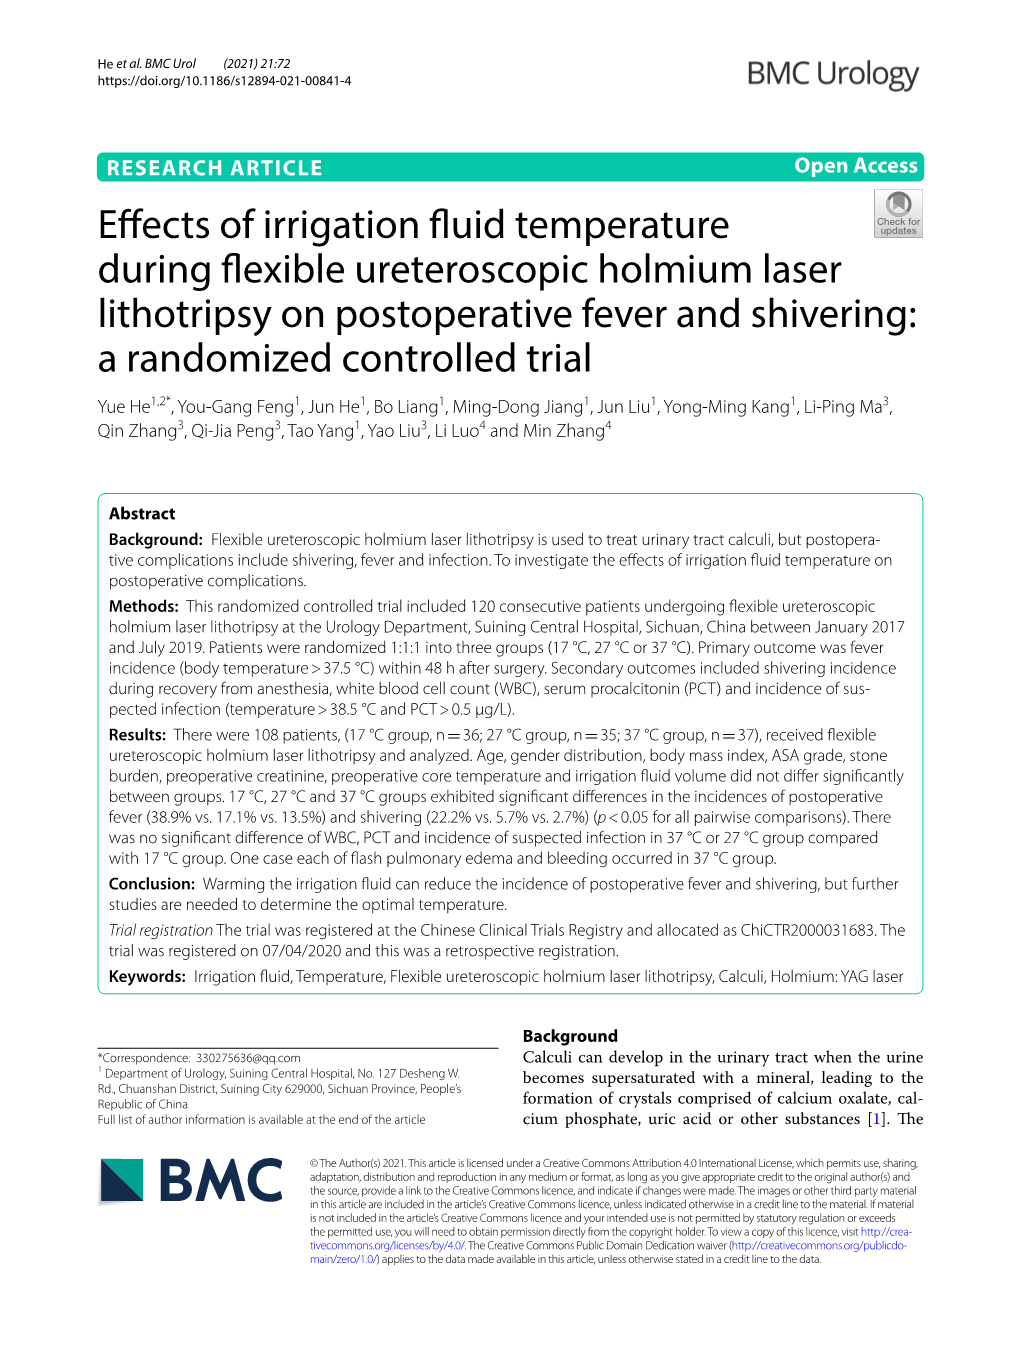 Effects of Irrigation Fluid Temperature During Flexible Ureteroscopic Holmium Laser Lithotripsy on Postoperative Fever and Shive